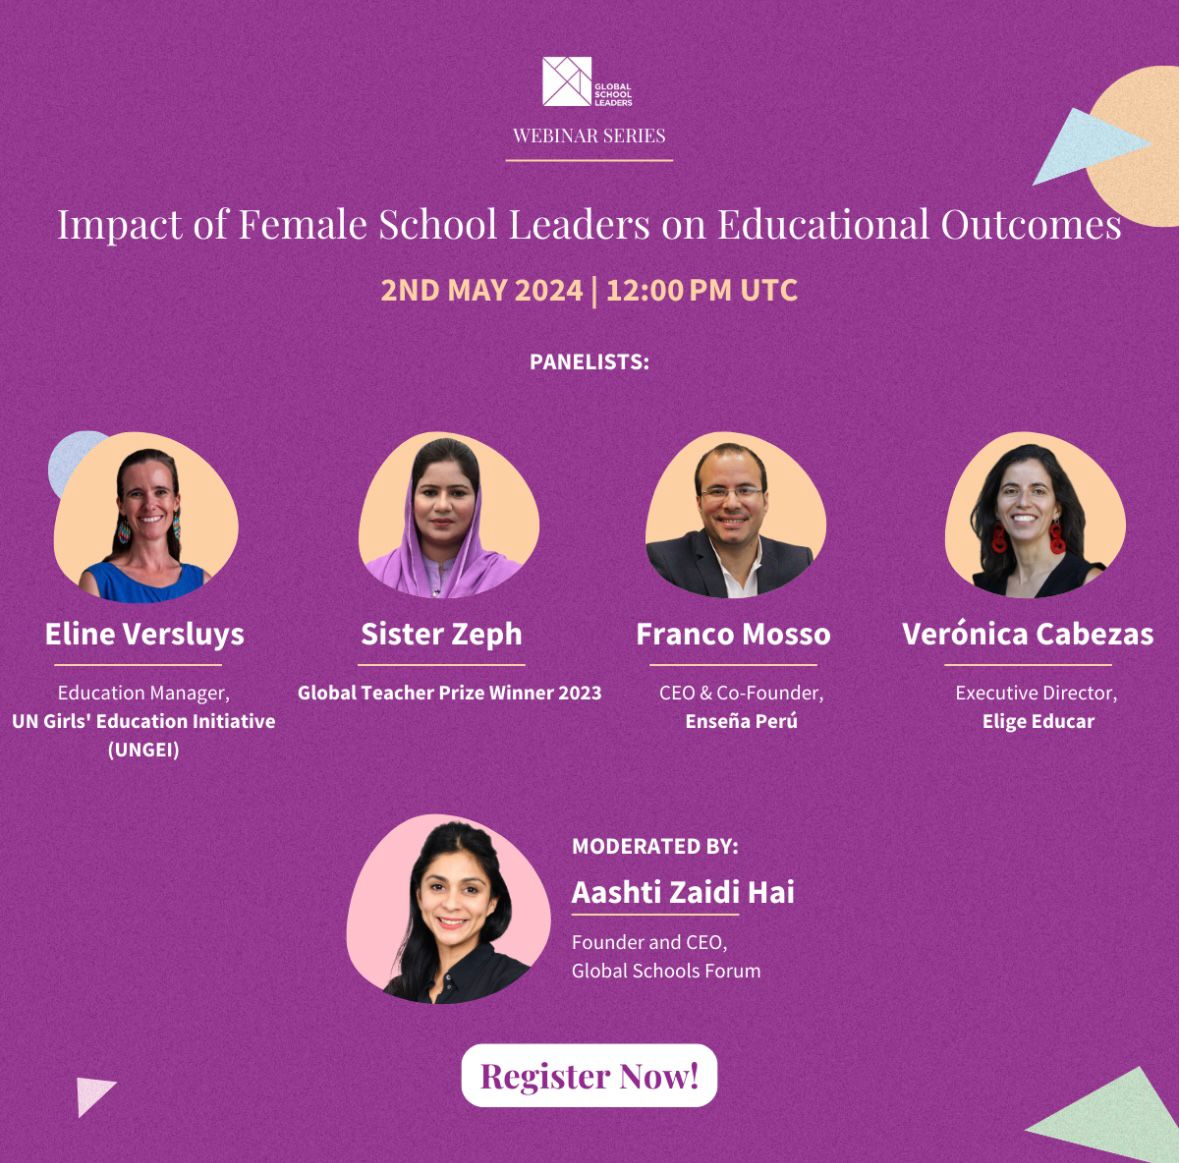 📢Starting now! Join us LIVE for the webinar focusing on the 'Impact of Female School Leaders on Educational Outcomes'. ▶️ bit.ly/4a0GZog #SchoolLeadership #GenderEquity